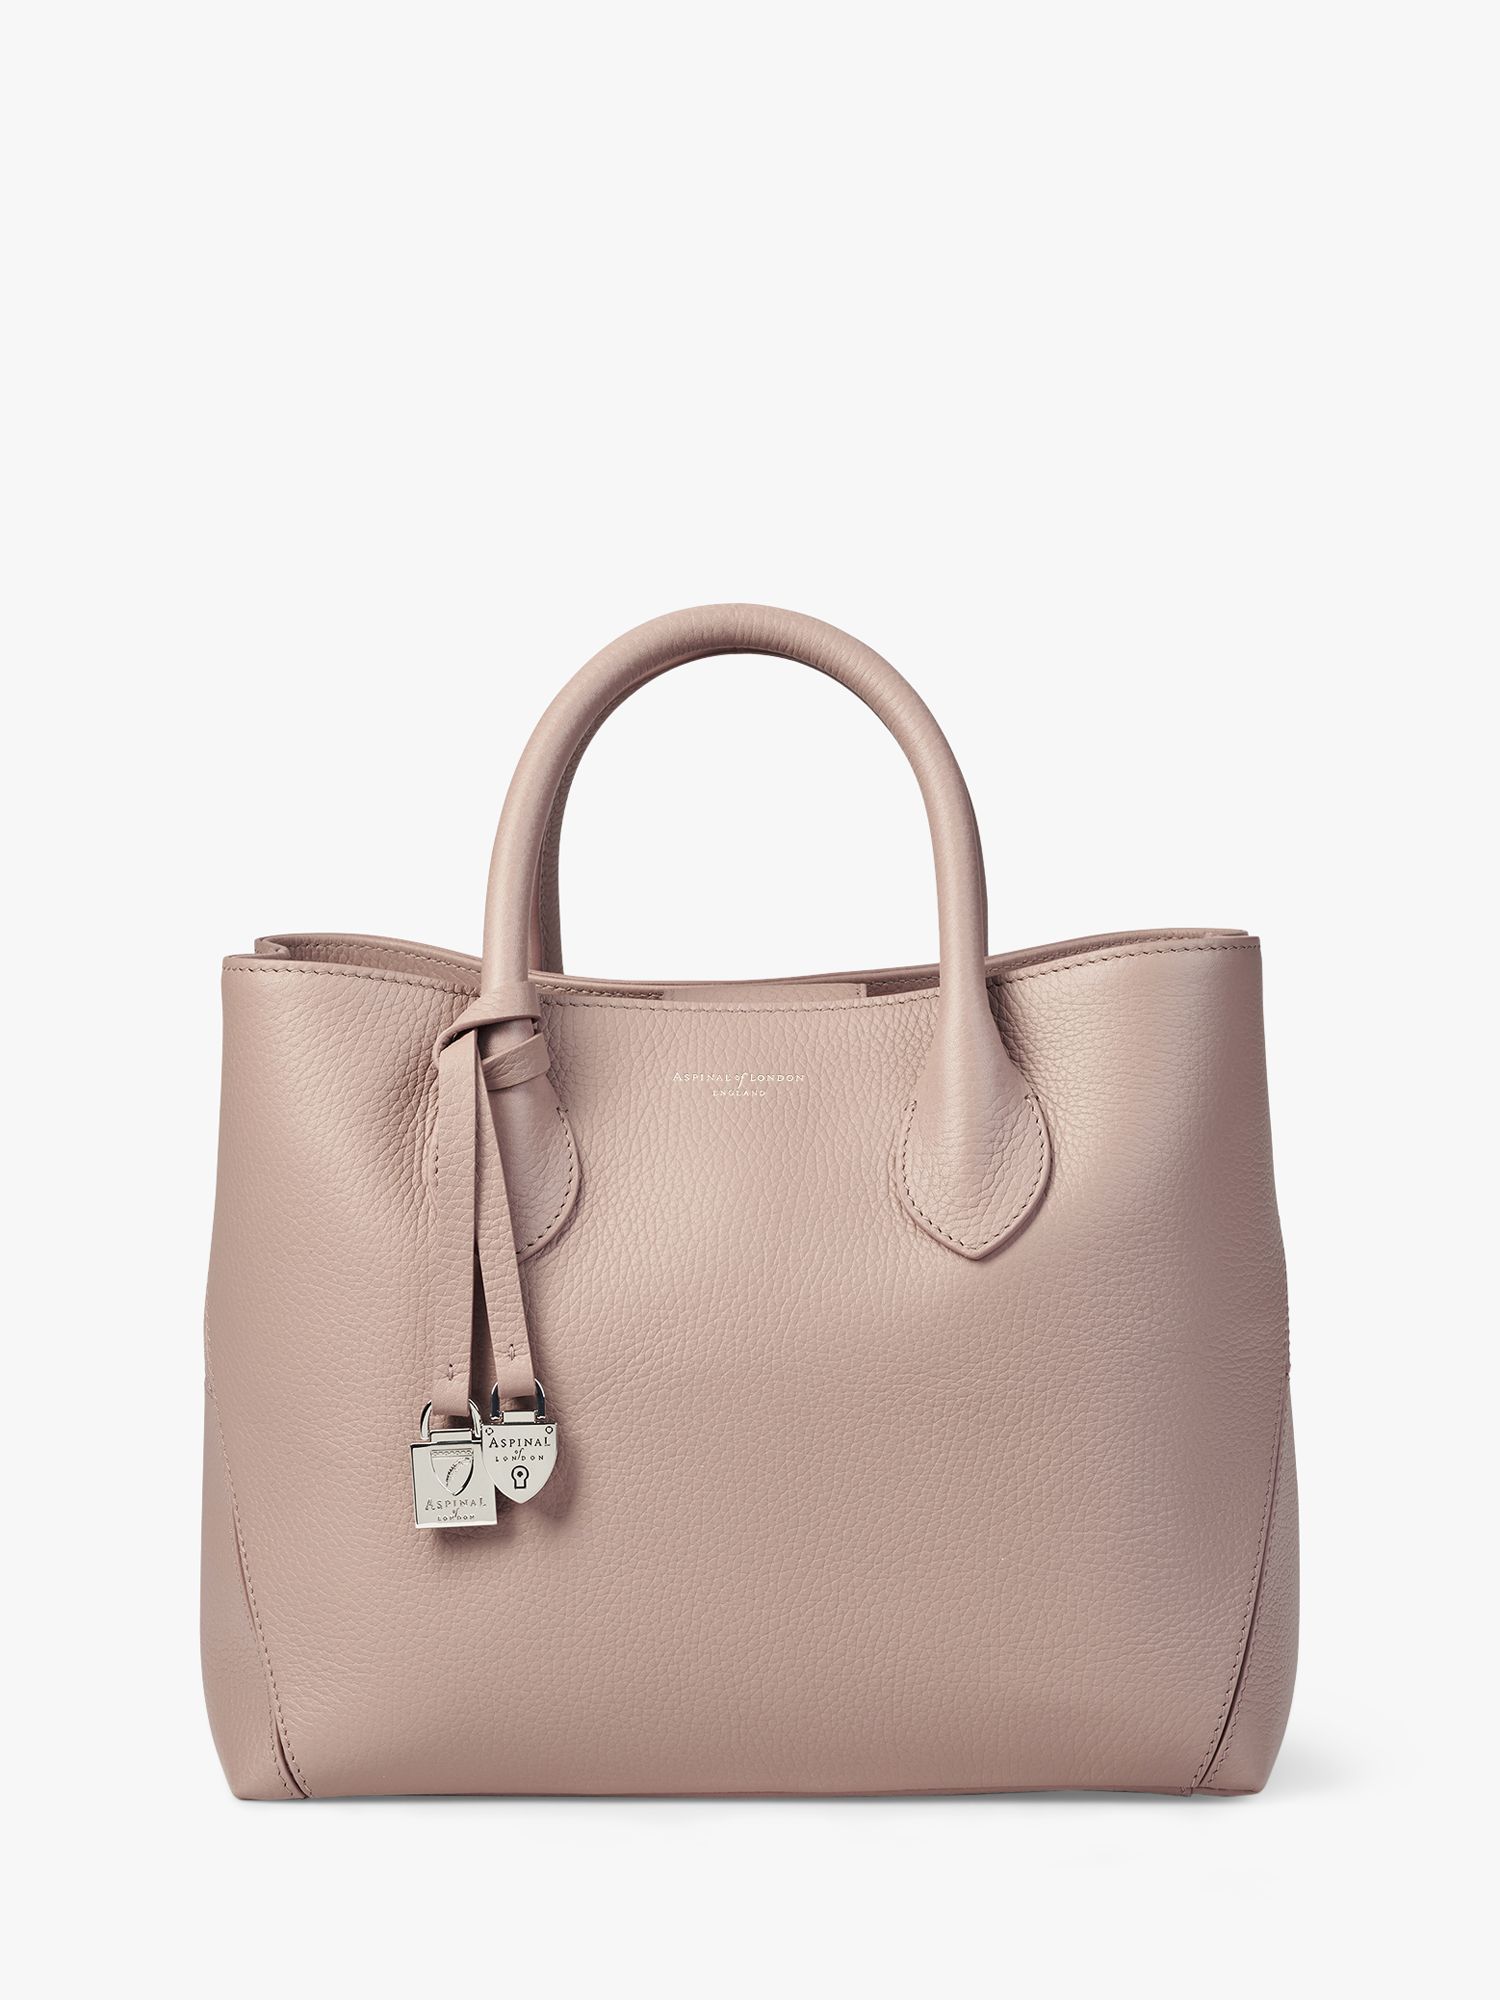 Buy Aspinal of London Midi London Leather Tote Bag, Soft Taupe Online at johnlewis.com